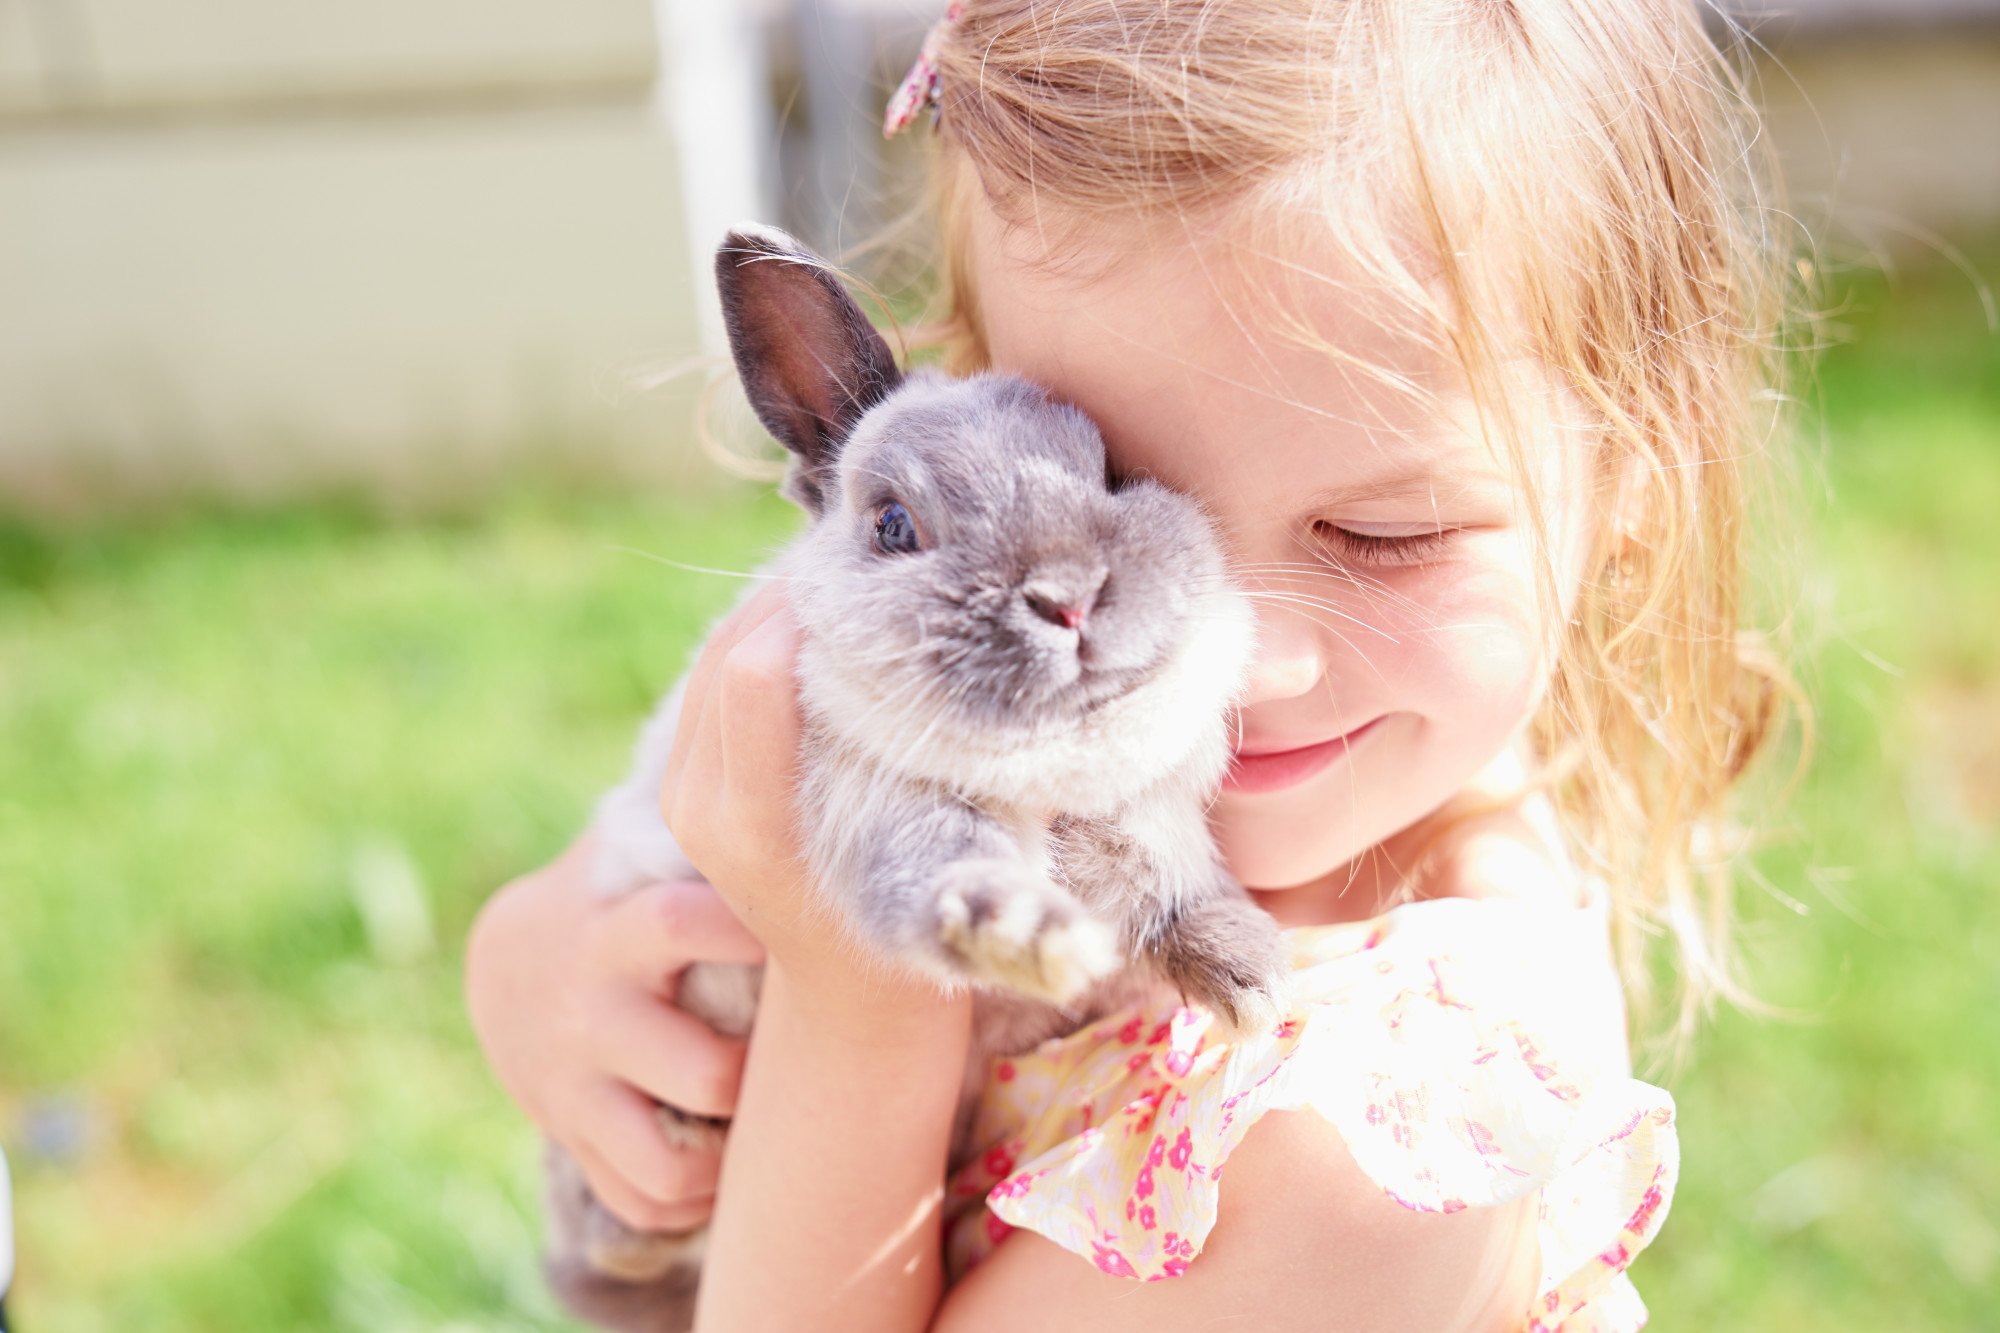 What are the benefits of having a bunny as a pet?